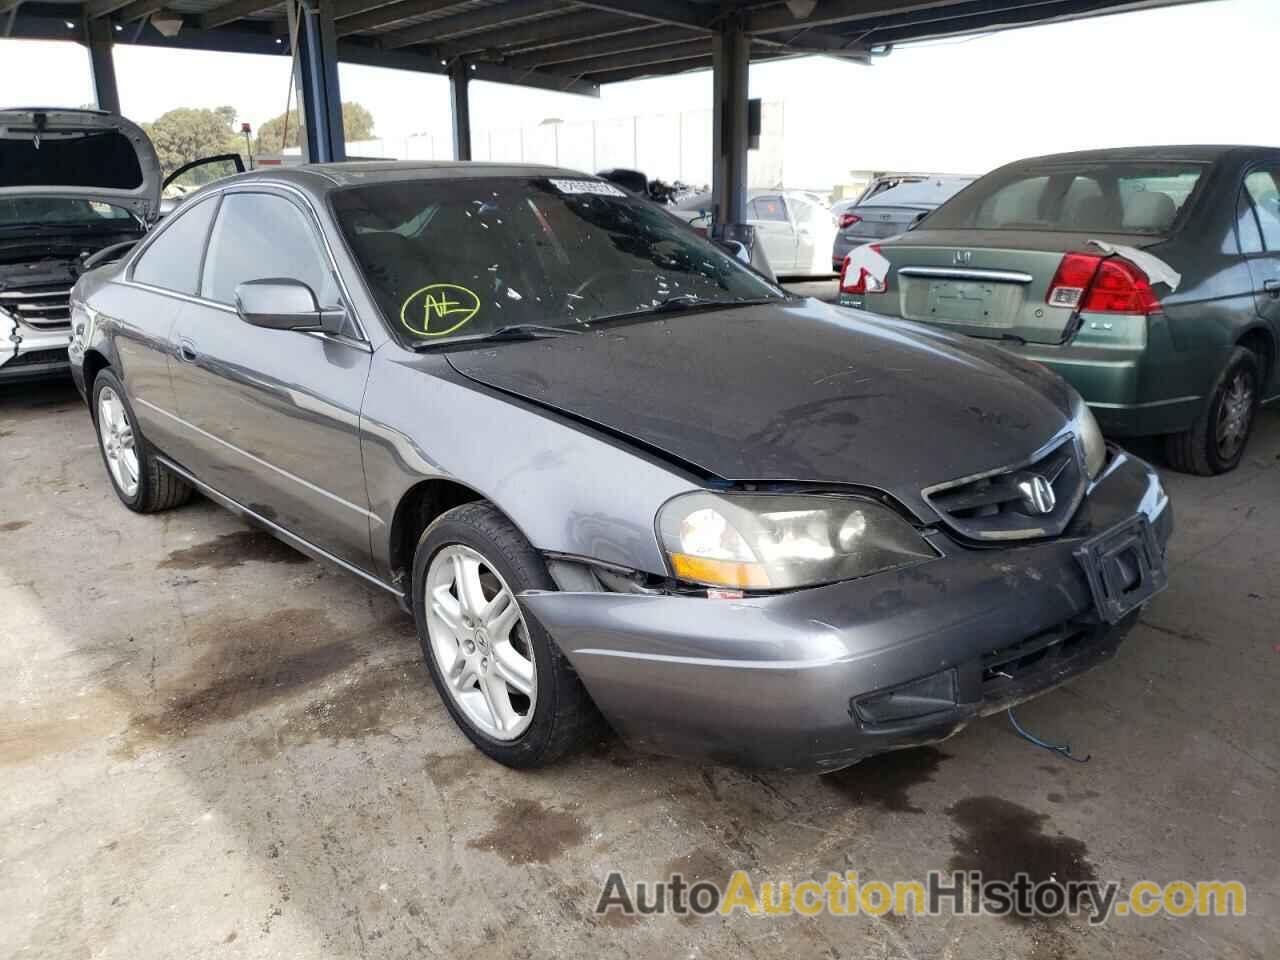 2003 ACURA CL TYPE-S, 19UYA42663A002442